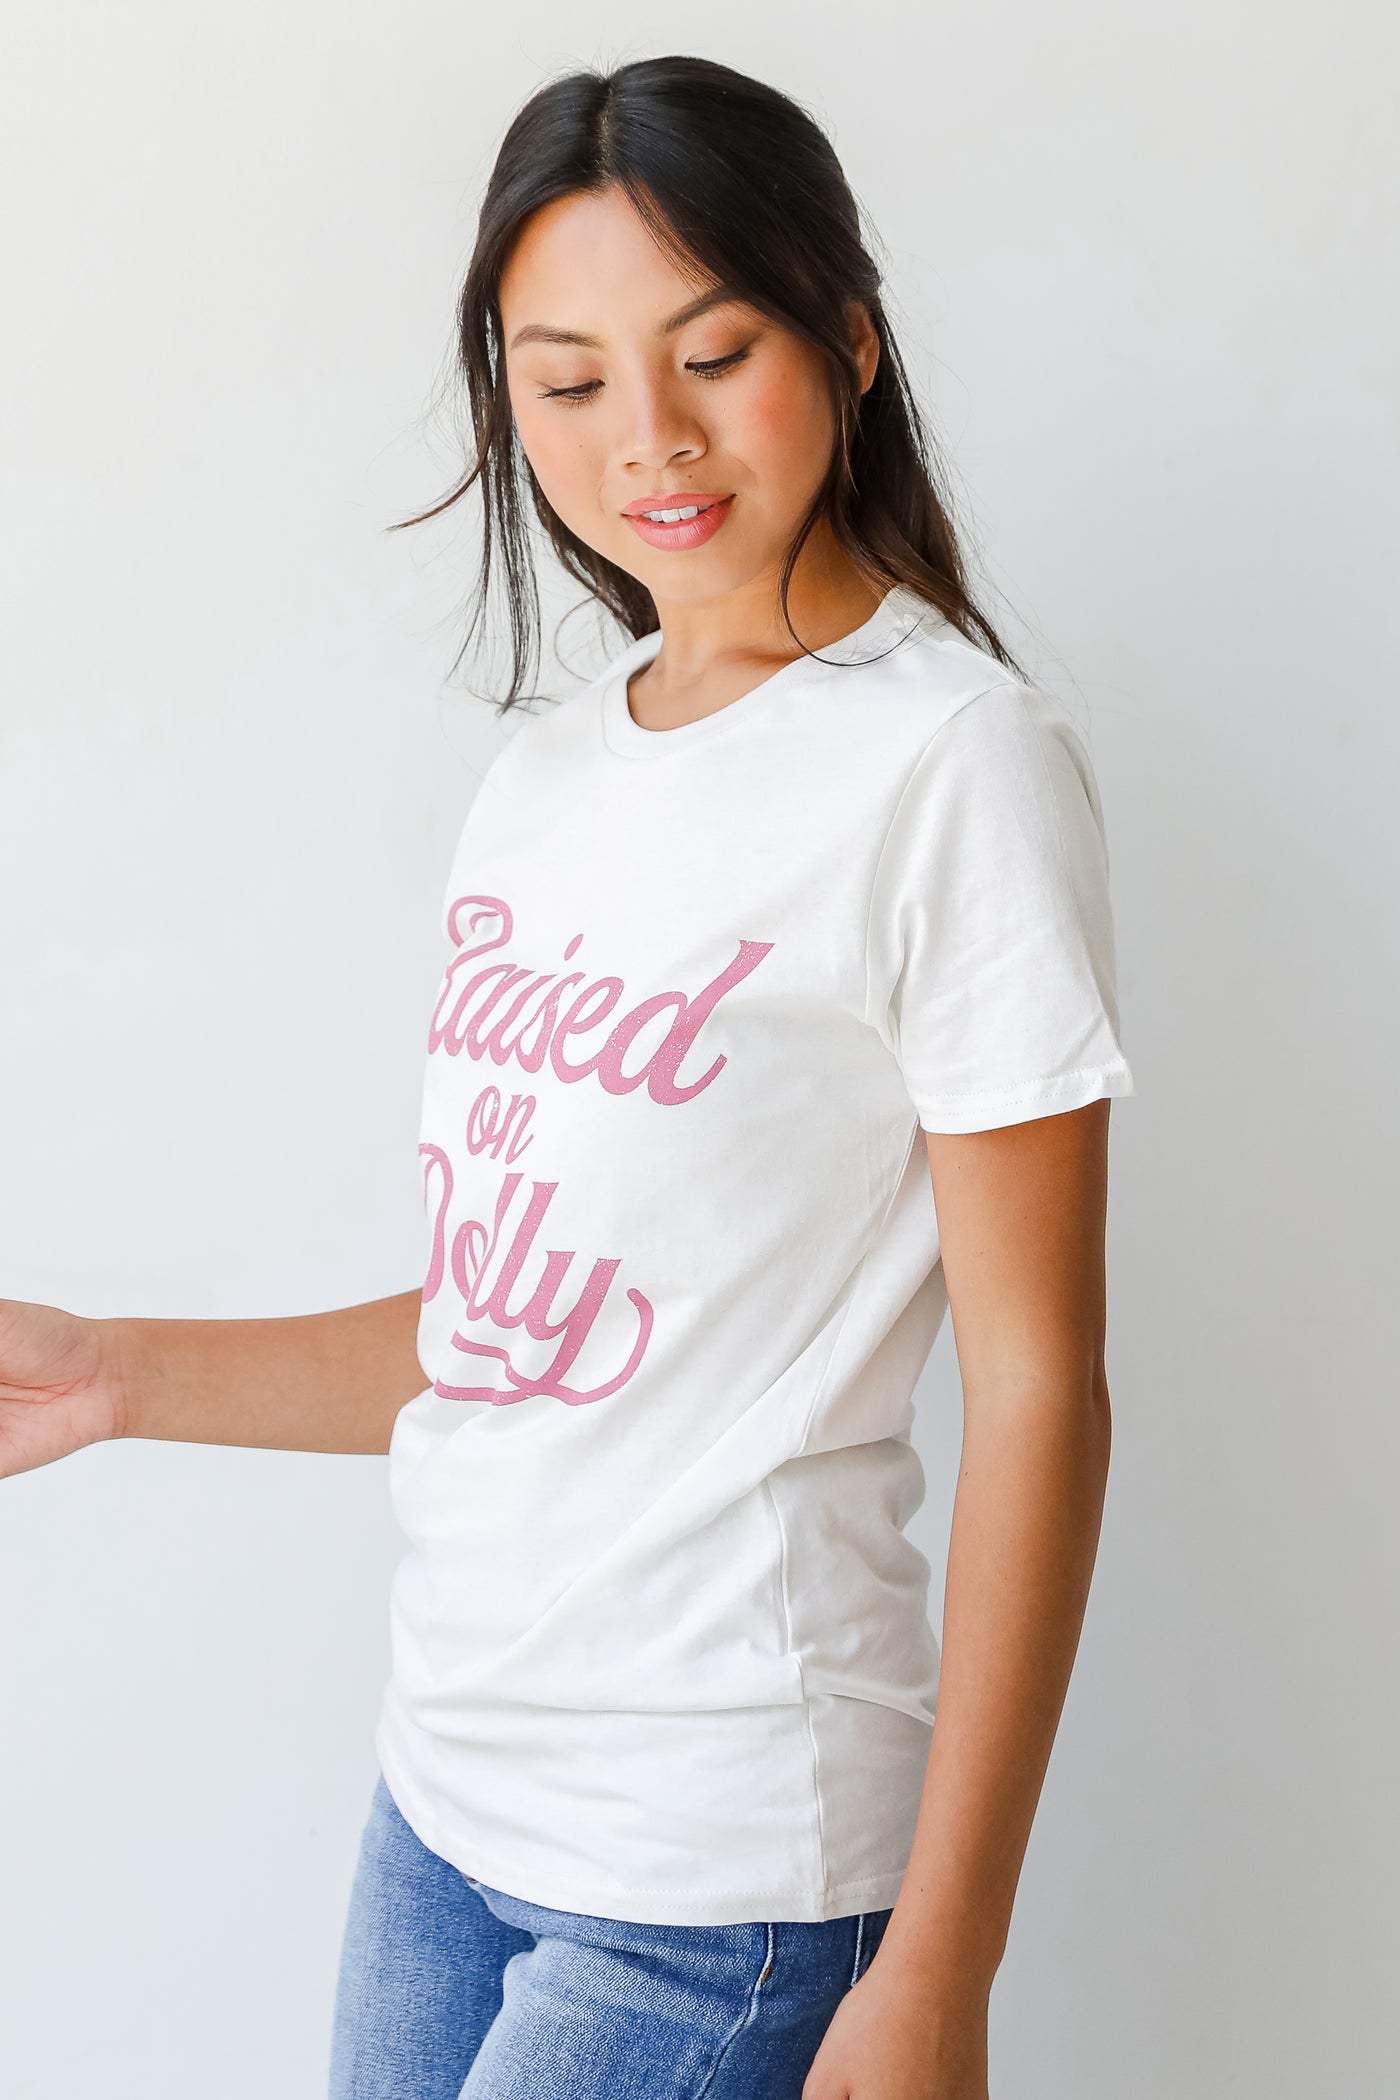 Raised On Dolly Tee side view